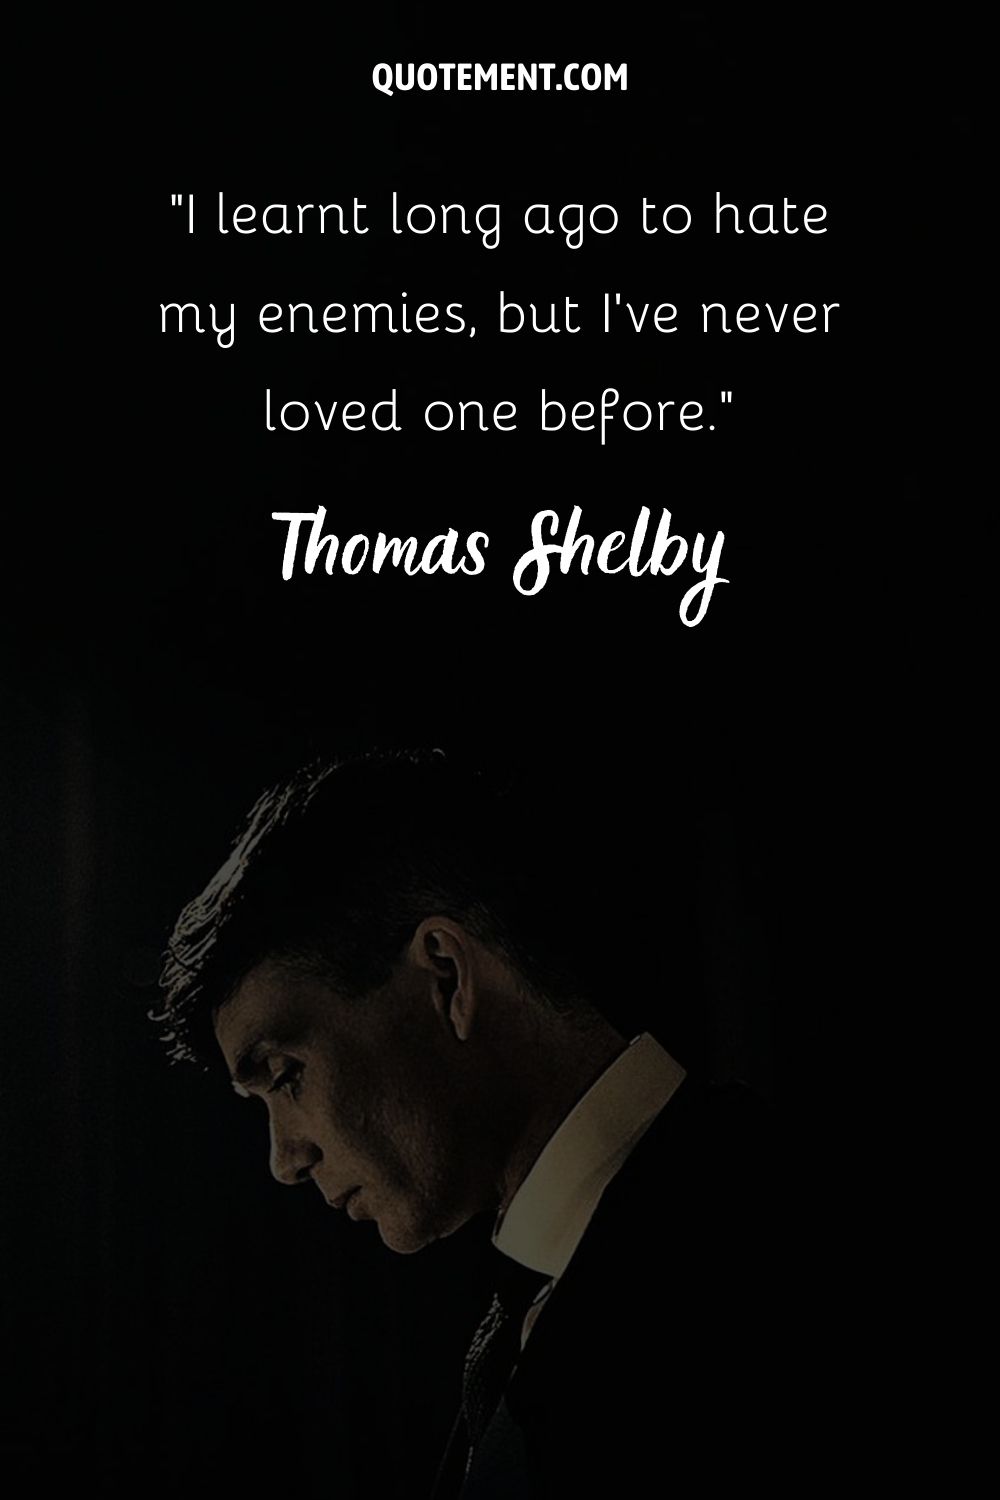 Cillian Murphy dons a contemplative look representing thomas shelby love quote